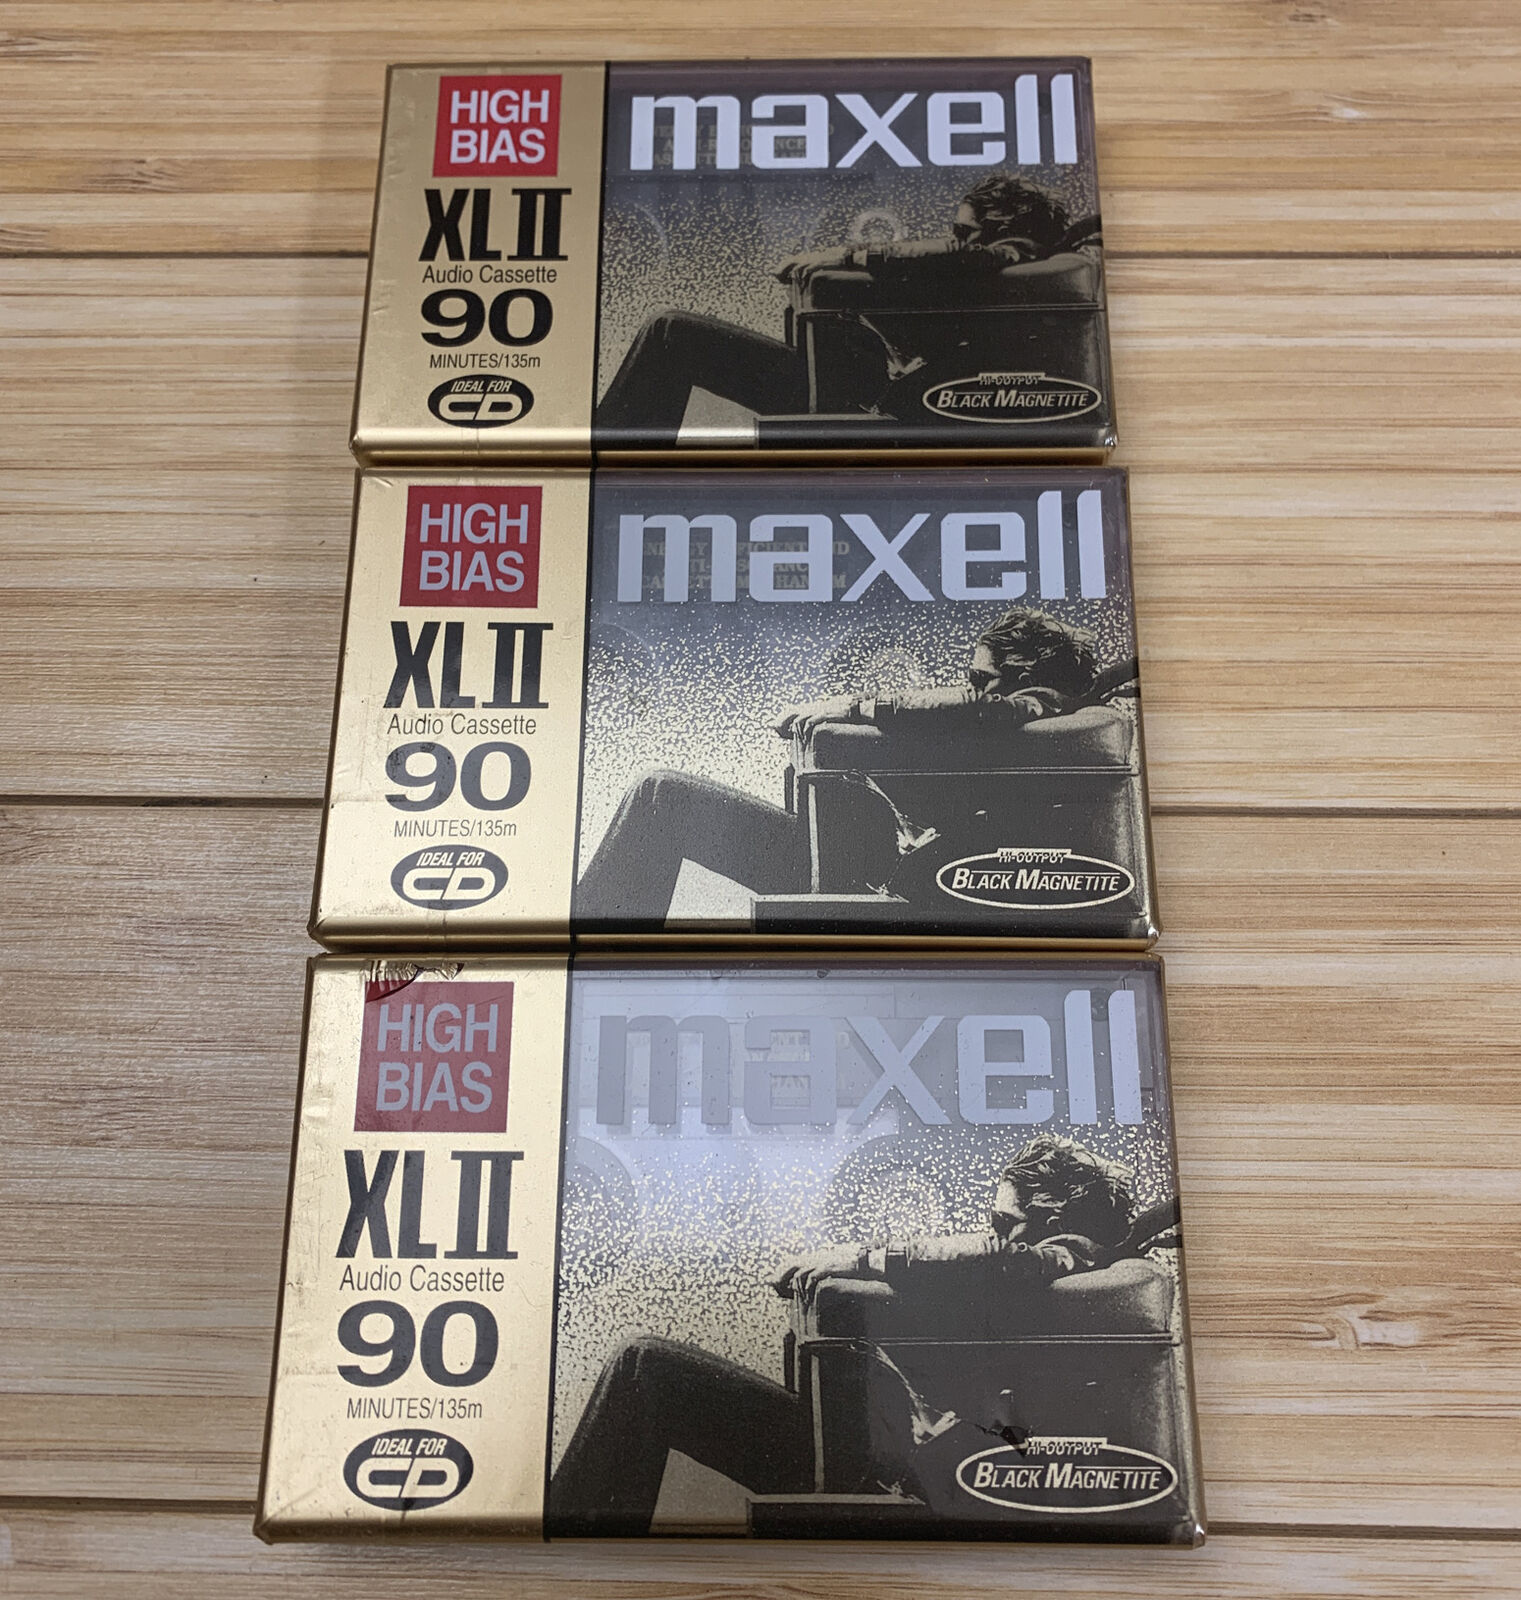 Lot of 3 New Maxell Cheap SALE Start Under blast sales XLII 90 Bi Tapes High Minutes Audio Cassette